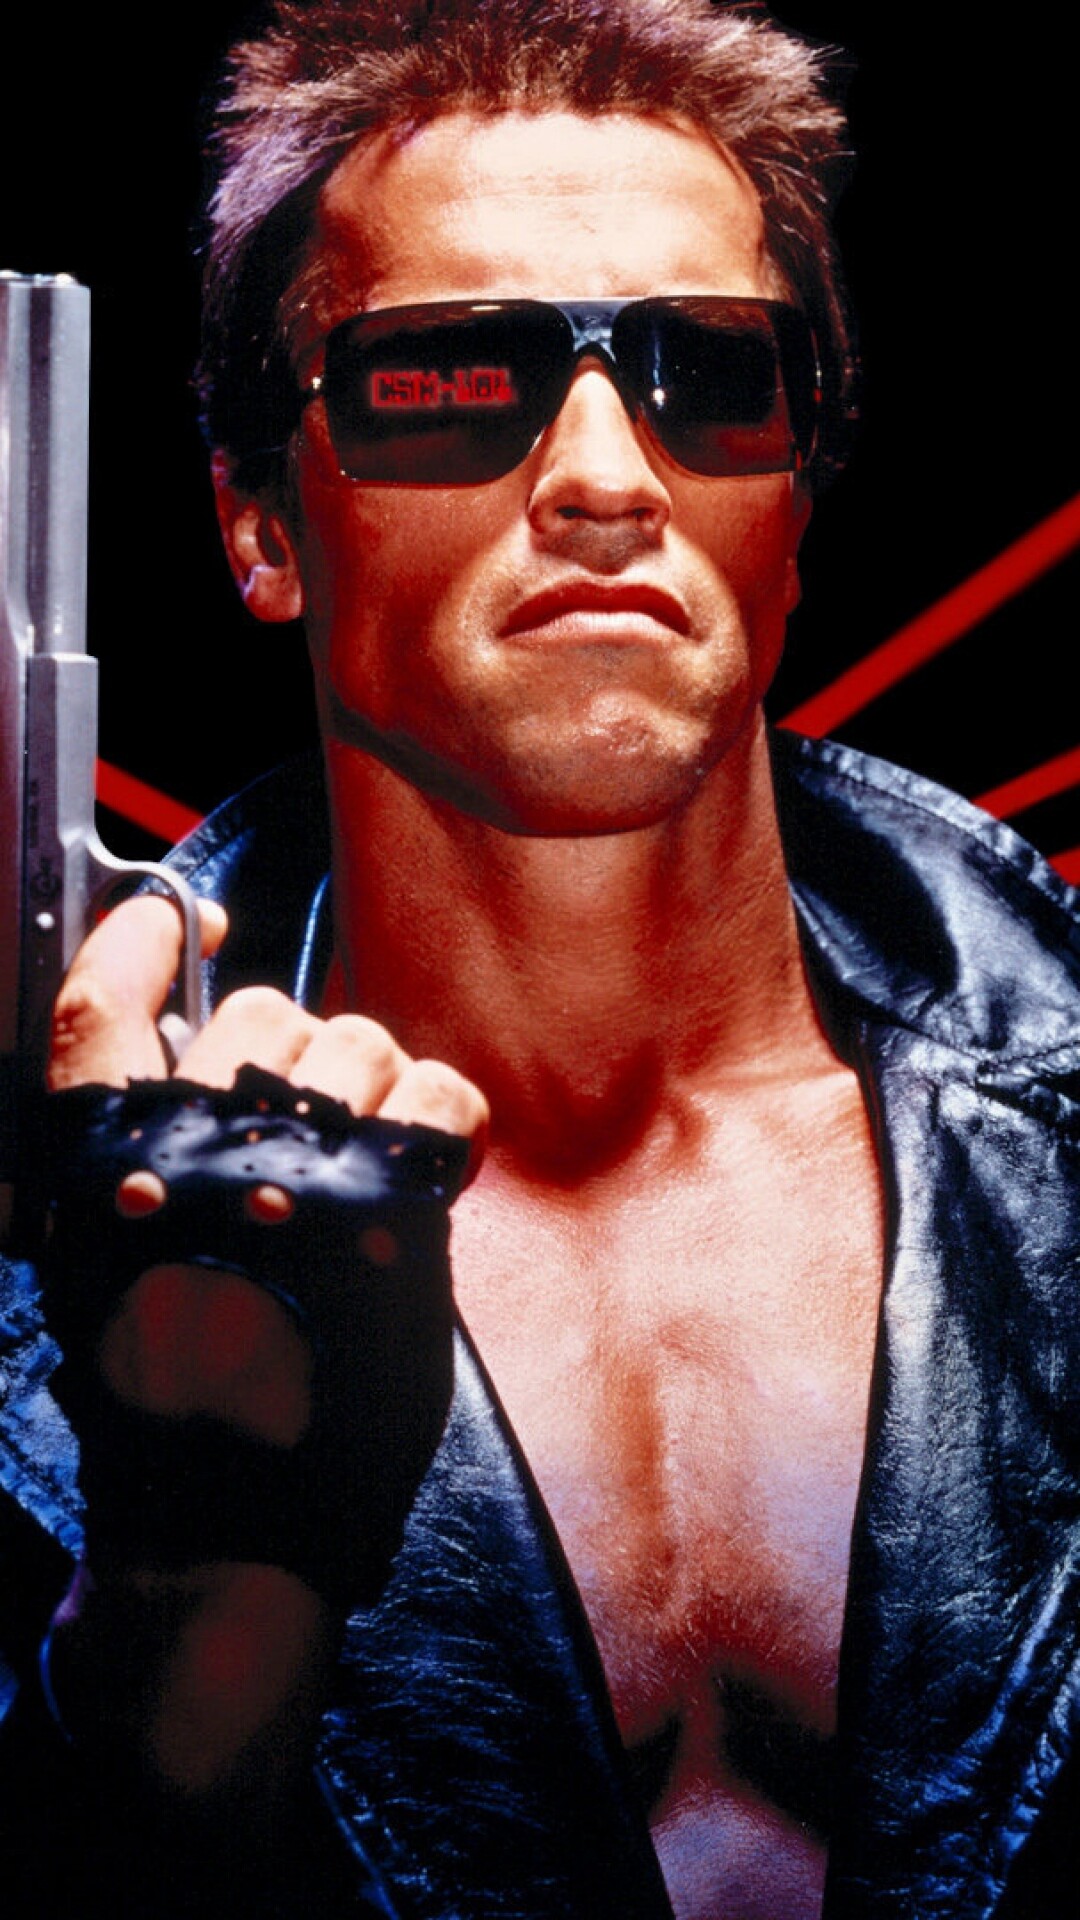 Arnold Schwarzenegger: The Terminator, a 1984 American science fiction action film, A cybernetic android. 1080x1920 Full HD Wallpaper.